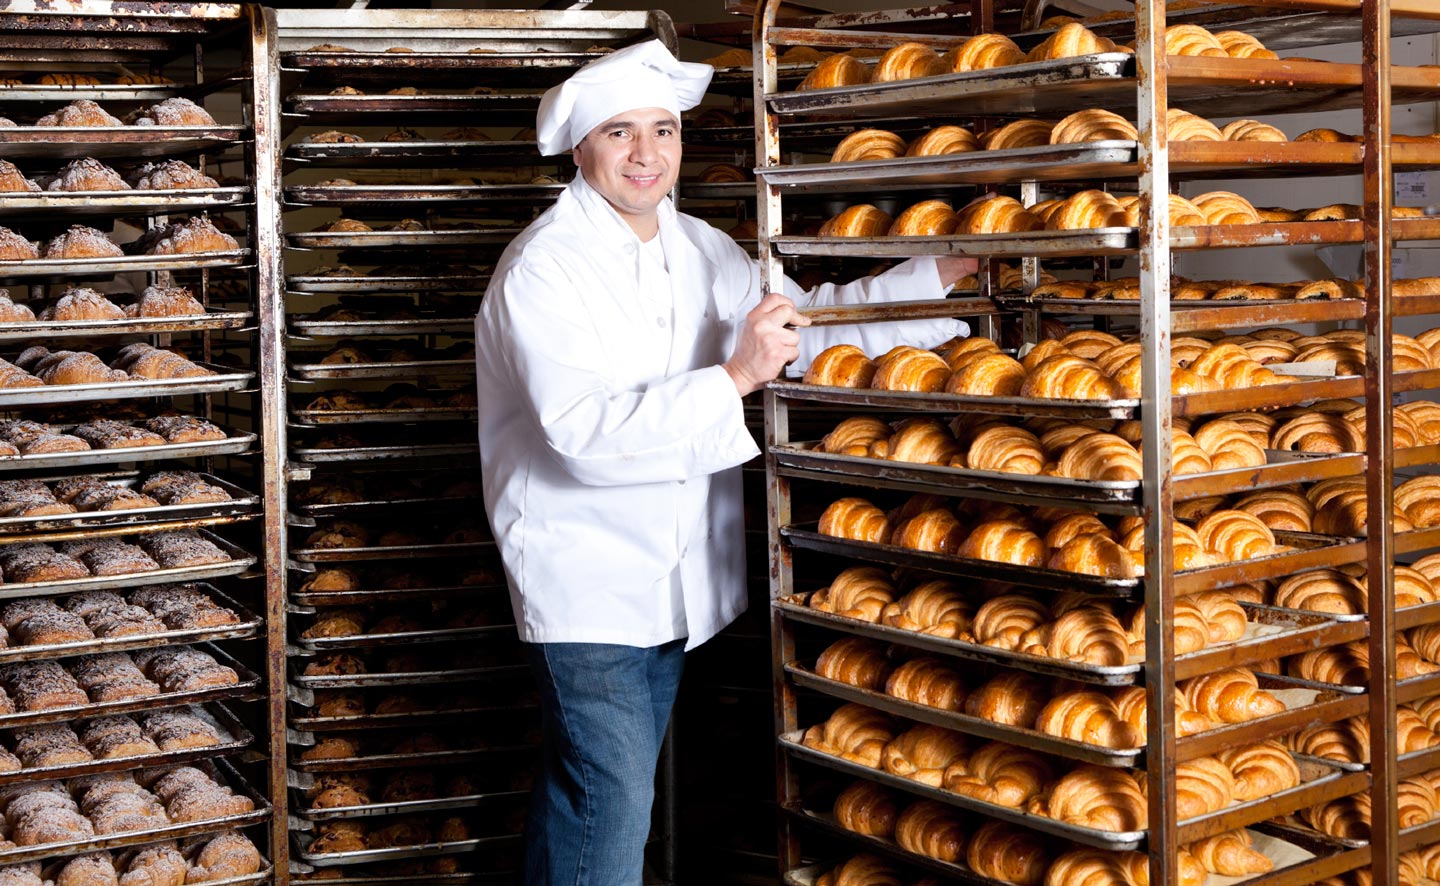 A baker stands next to one of many racks filled with baked goods.